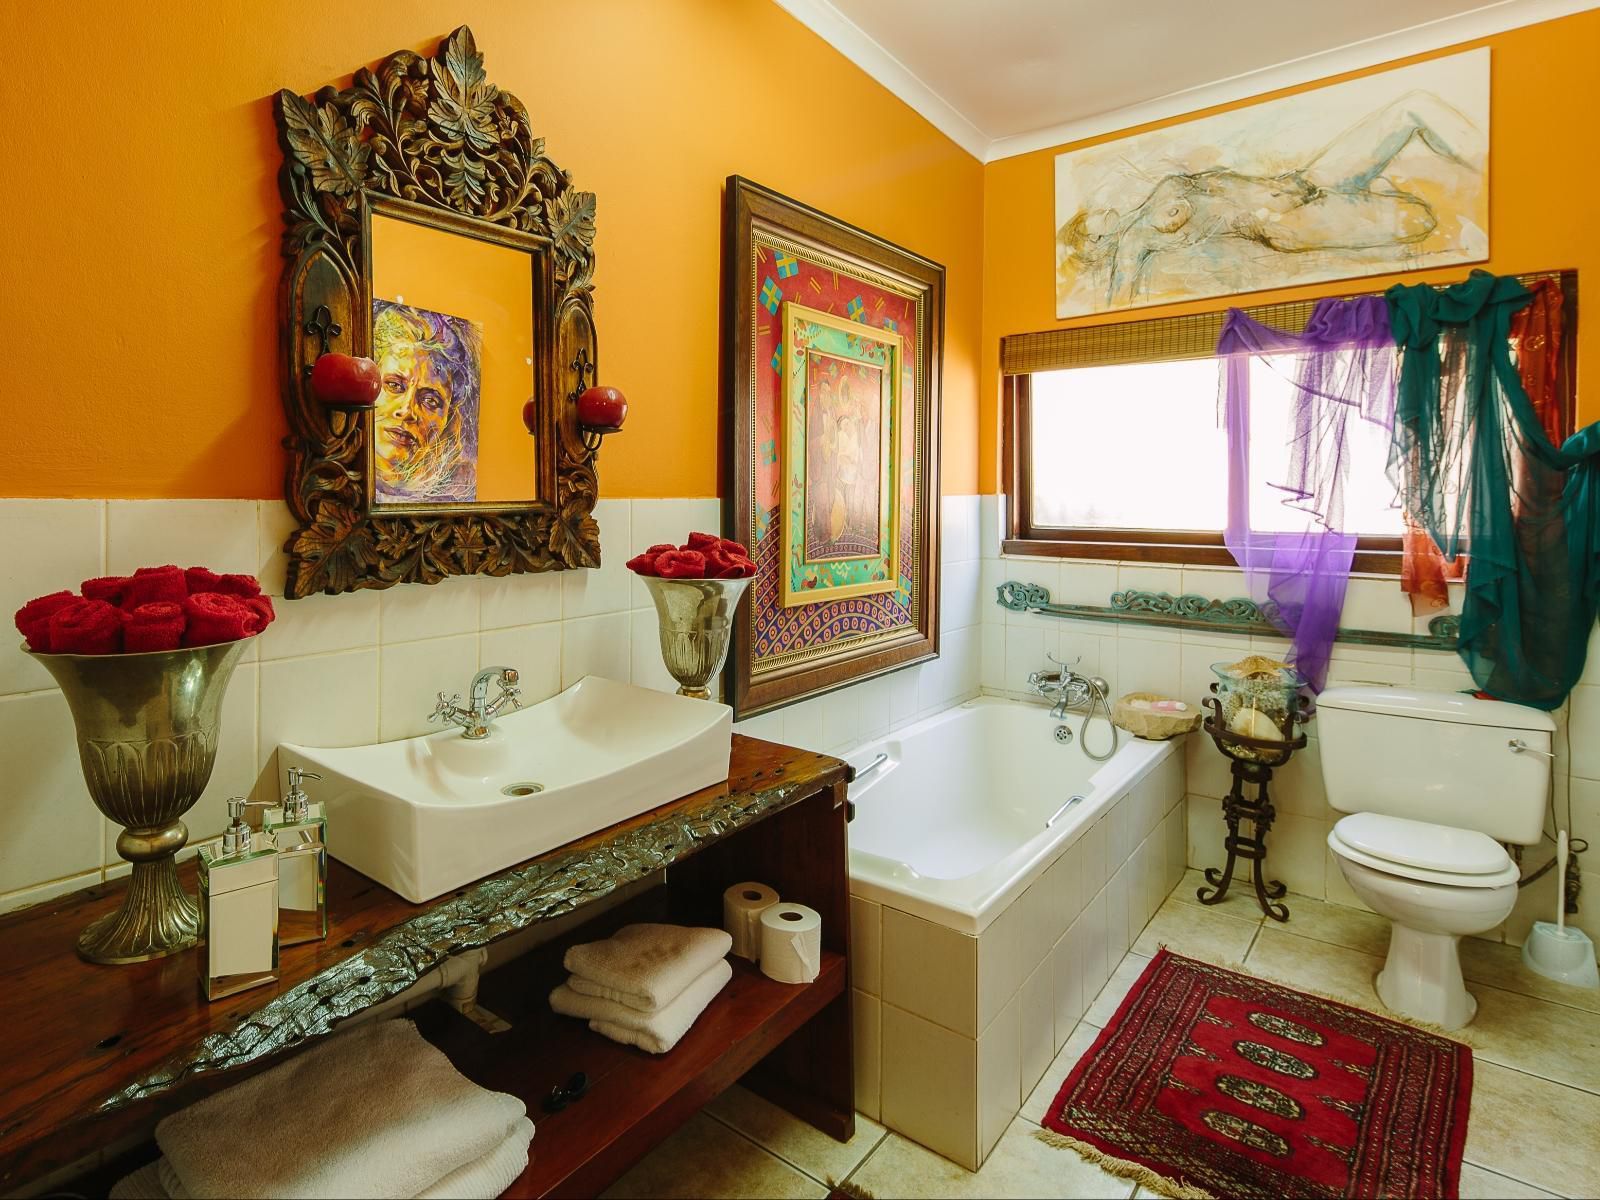 The Art Guesthouse Schoemansville Hartbeespoort North West Province South Africa Bathroom